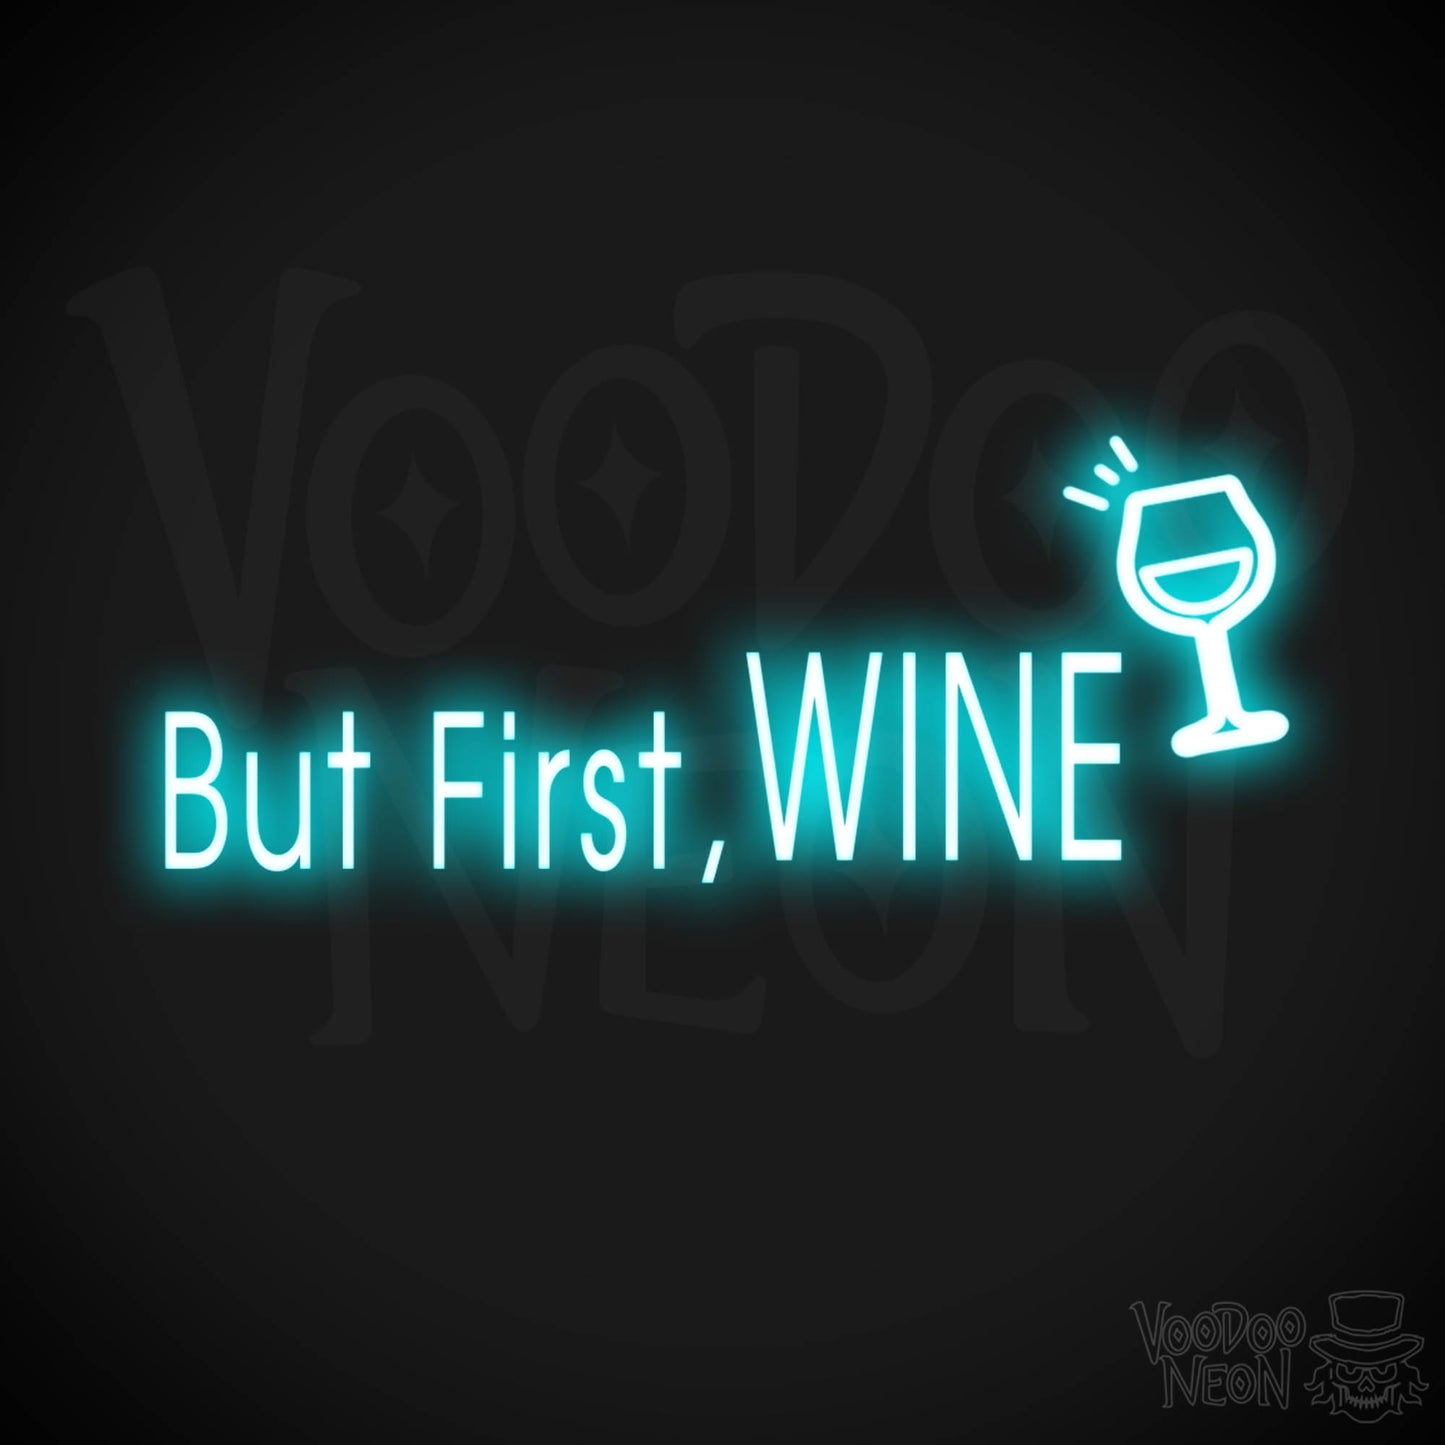 But First Wine Neon Sign - But First Wine Sign - Neon Wine Wall Art - Color Ice Blue